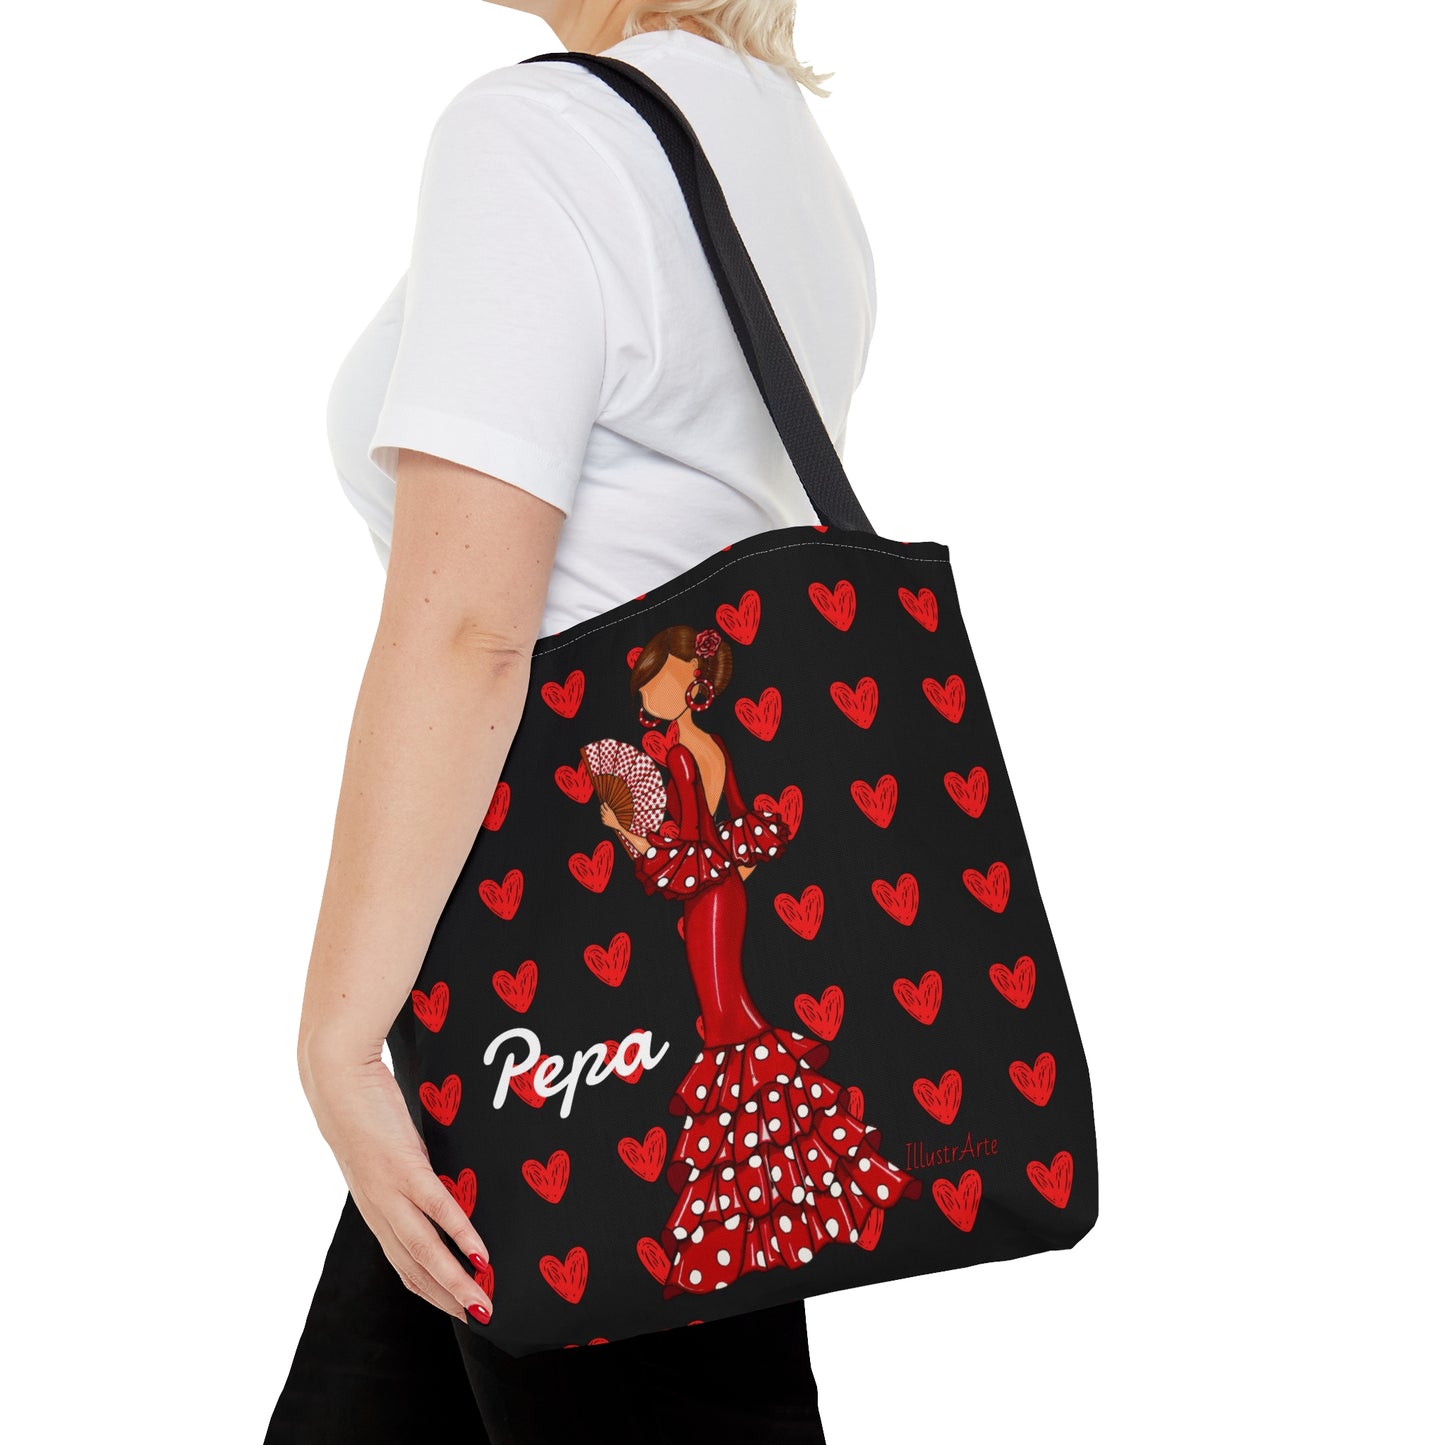 a woman carrying a large bag with hearts on it